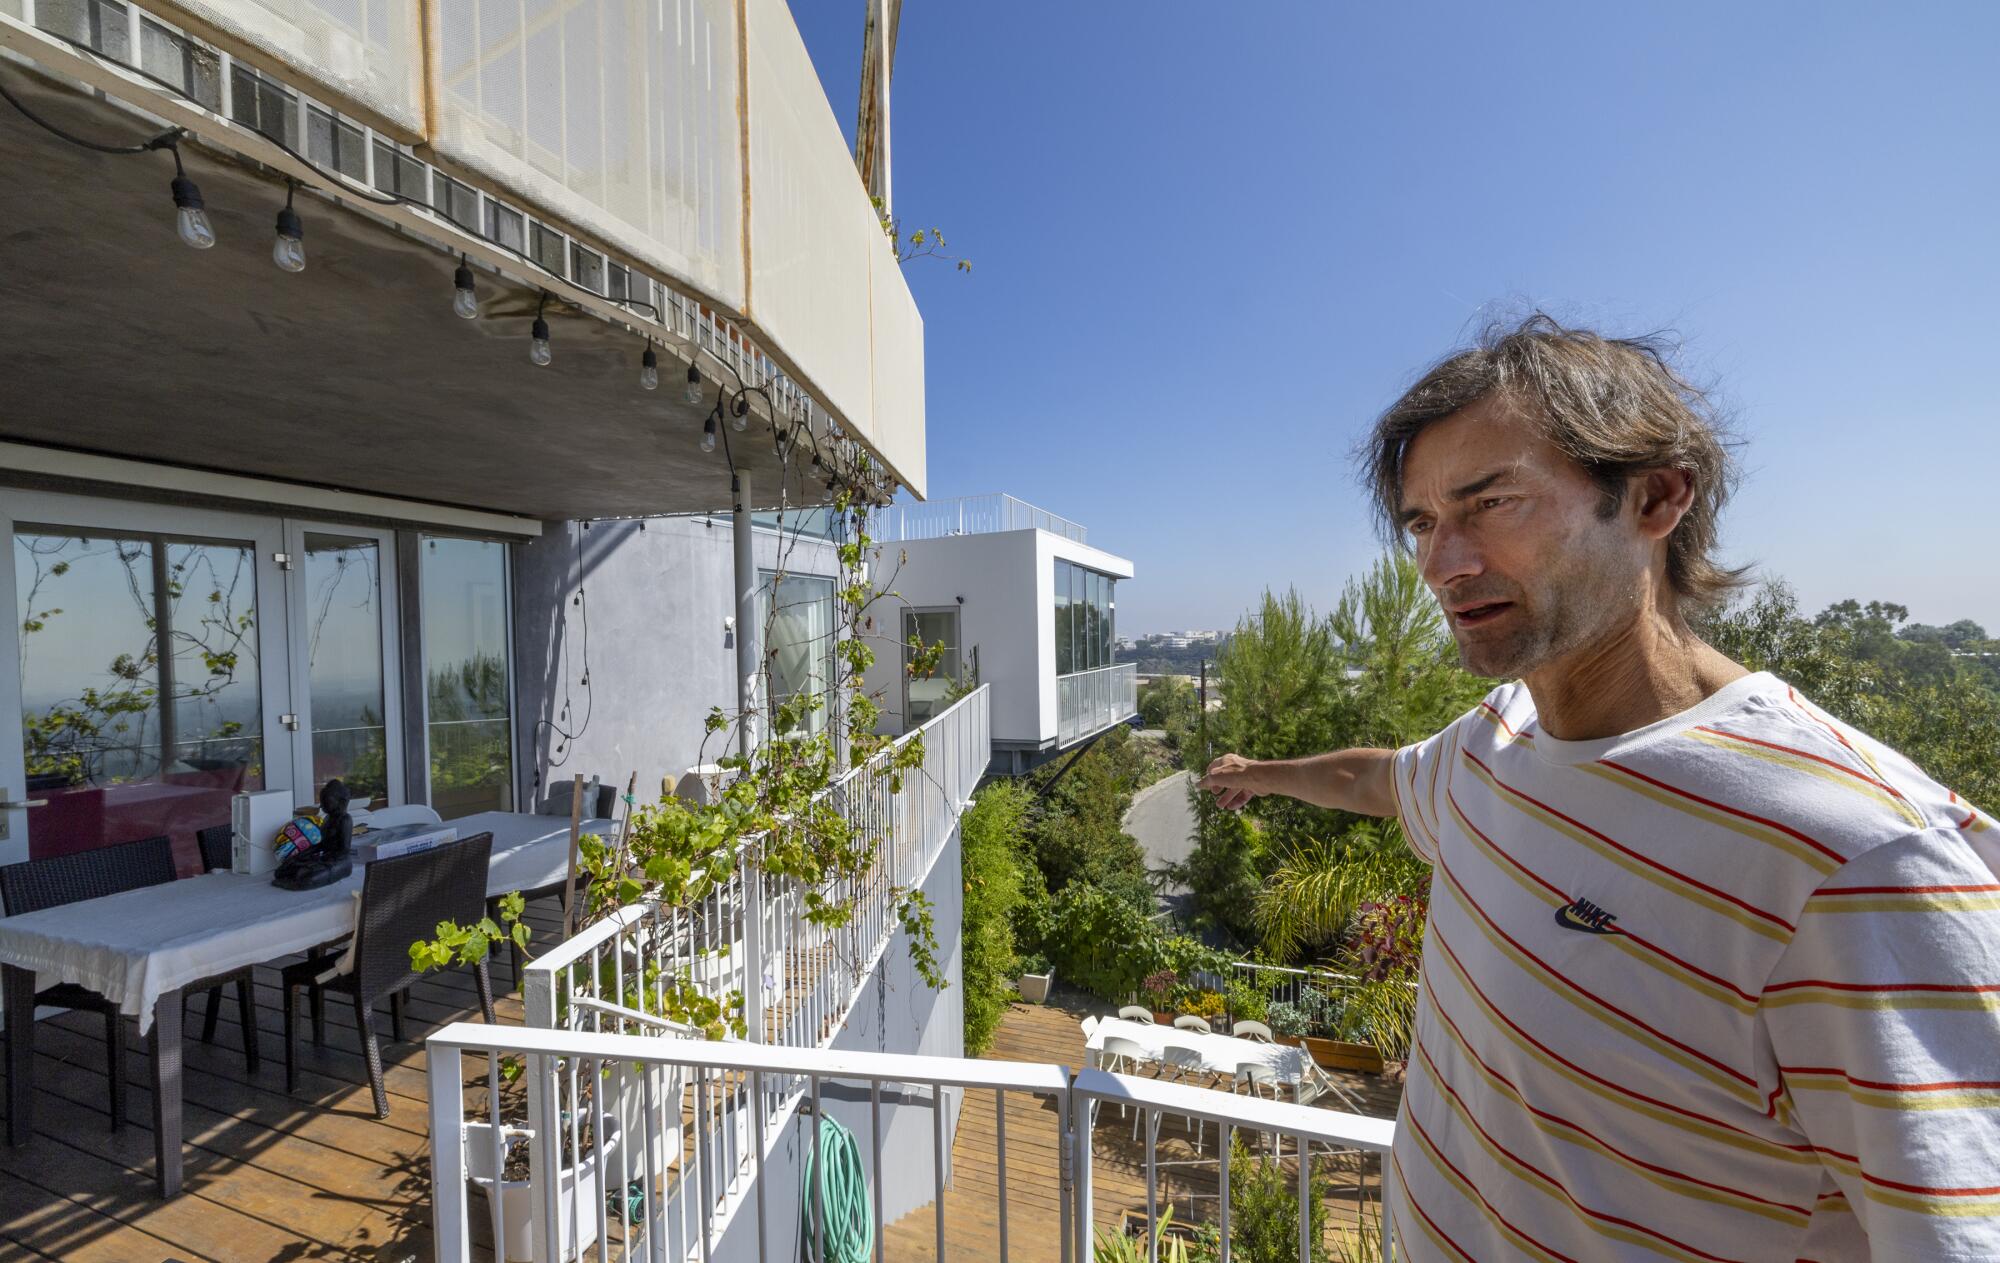 Sascha Jovanovic explains his situation on the deck of his Los Angeles home.